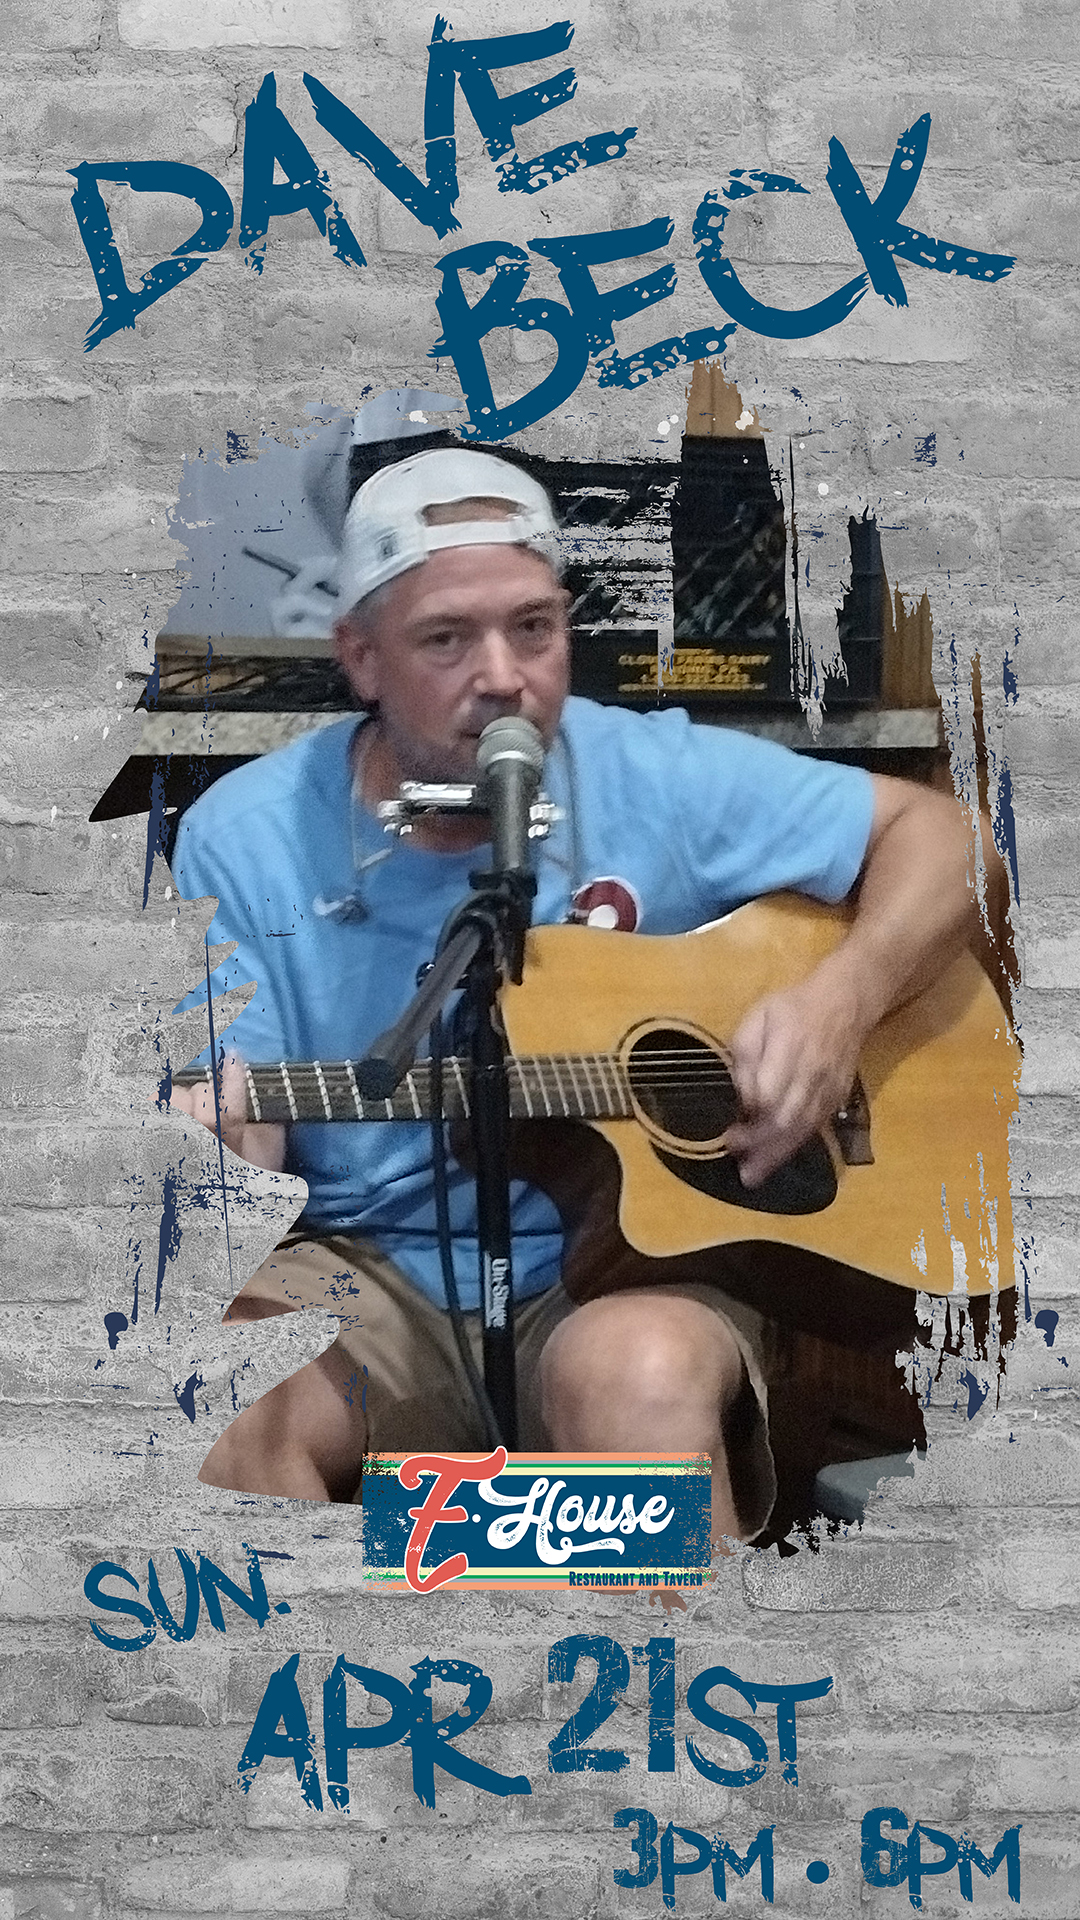 Elderly man playing an acoustic guitar, wearing a white cap and blue shirt, with text overlay advertising a performance by dave beck at e-house on april 21st from 3-6 pm.